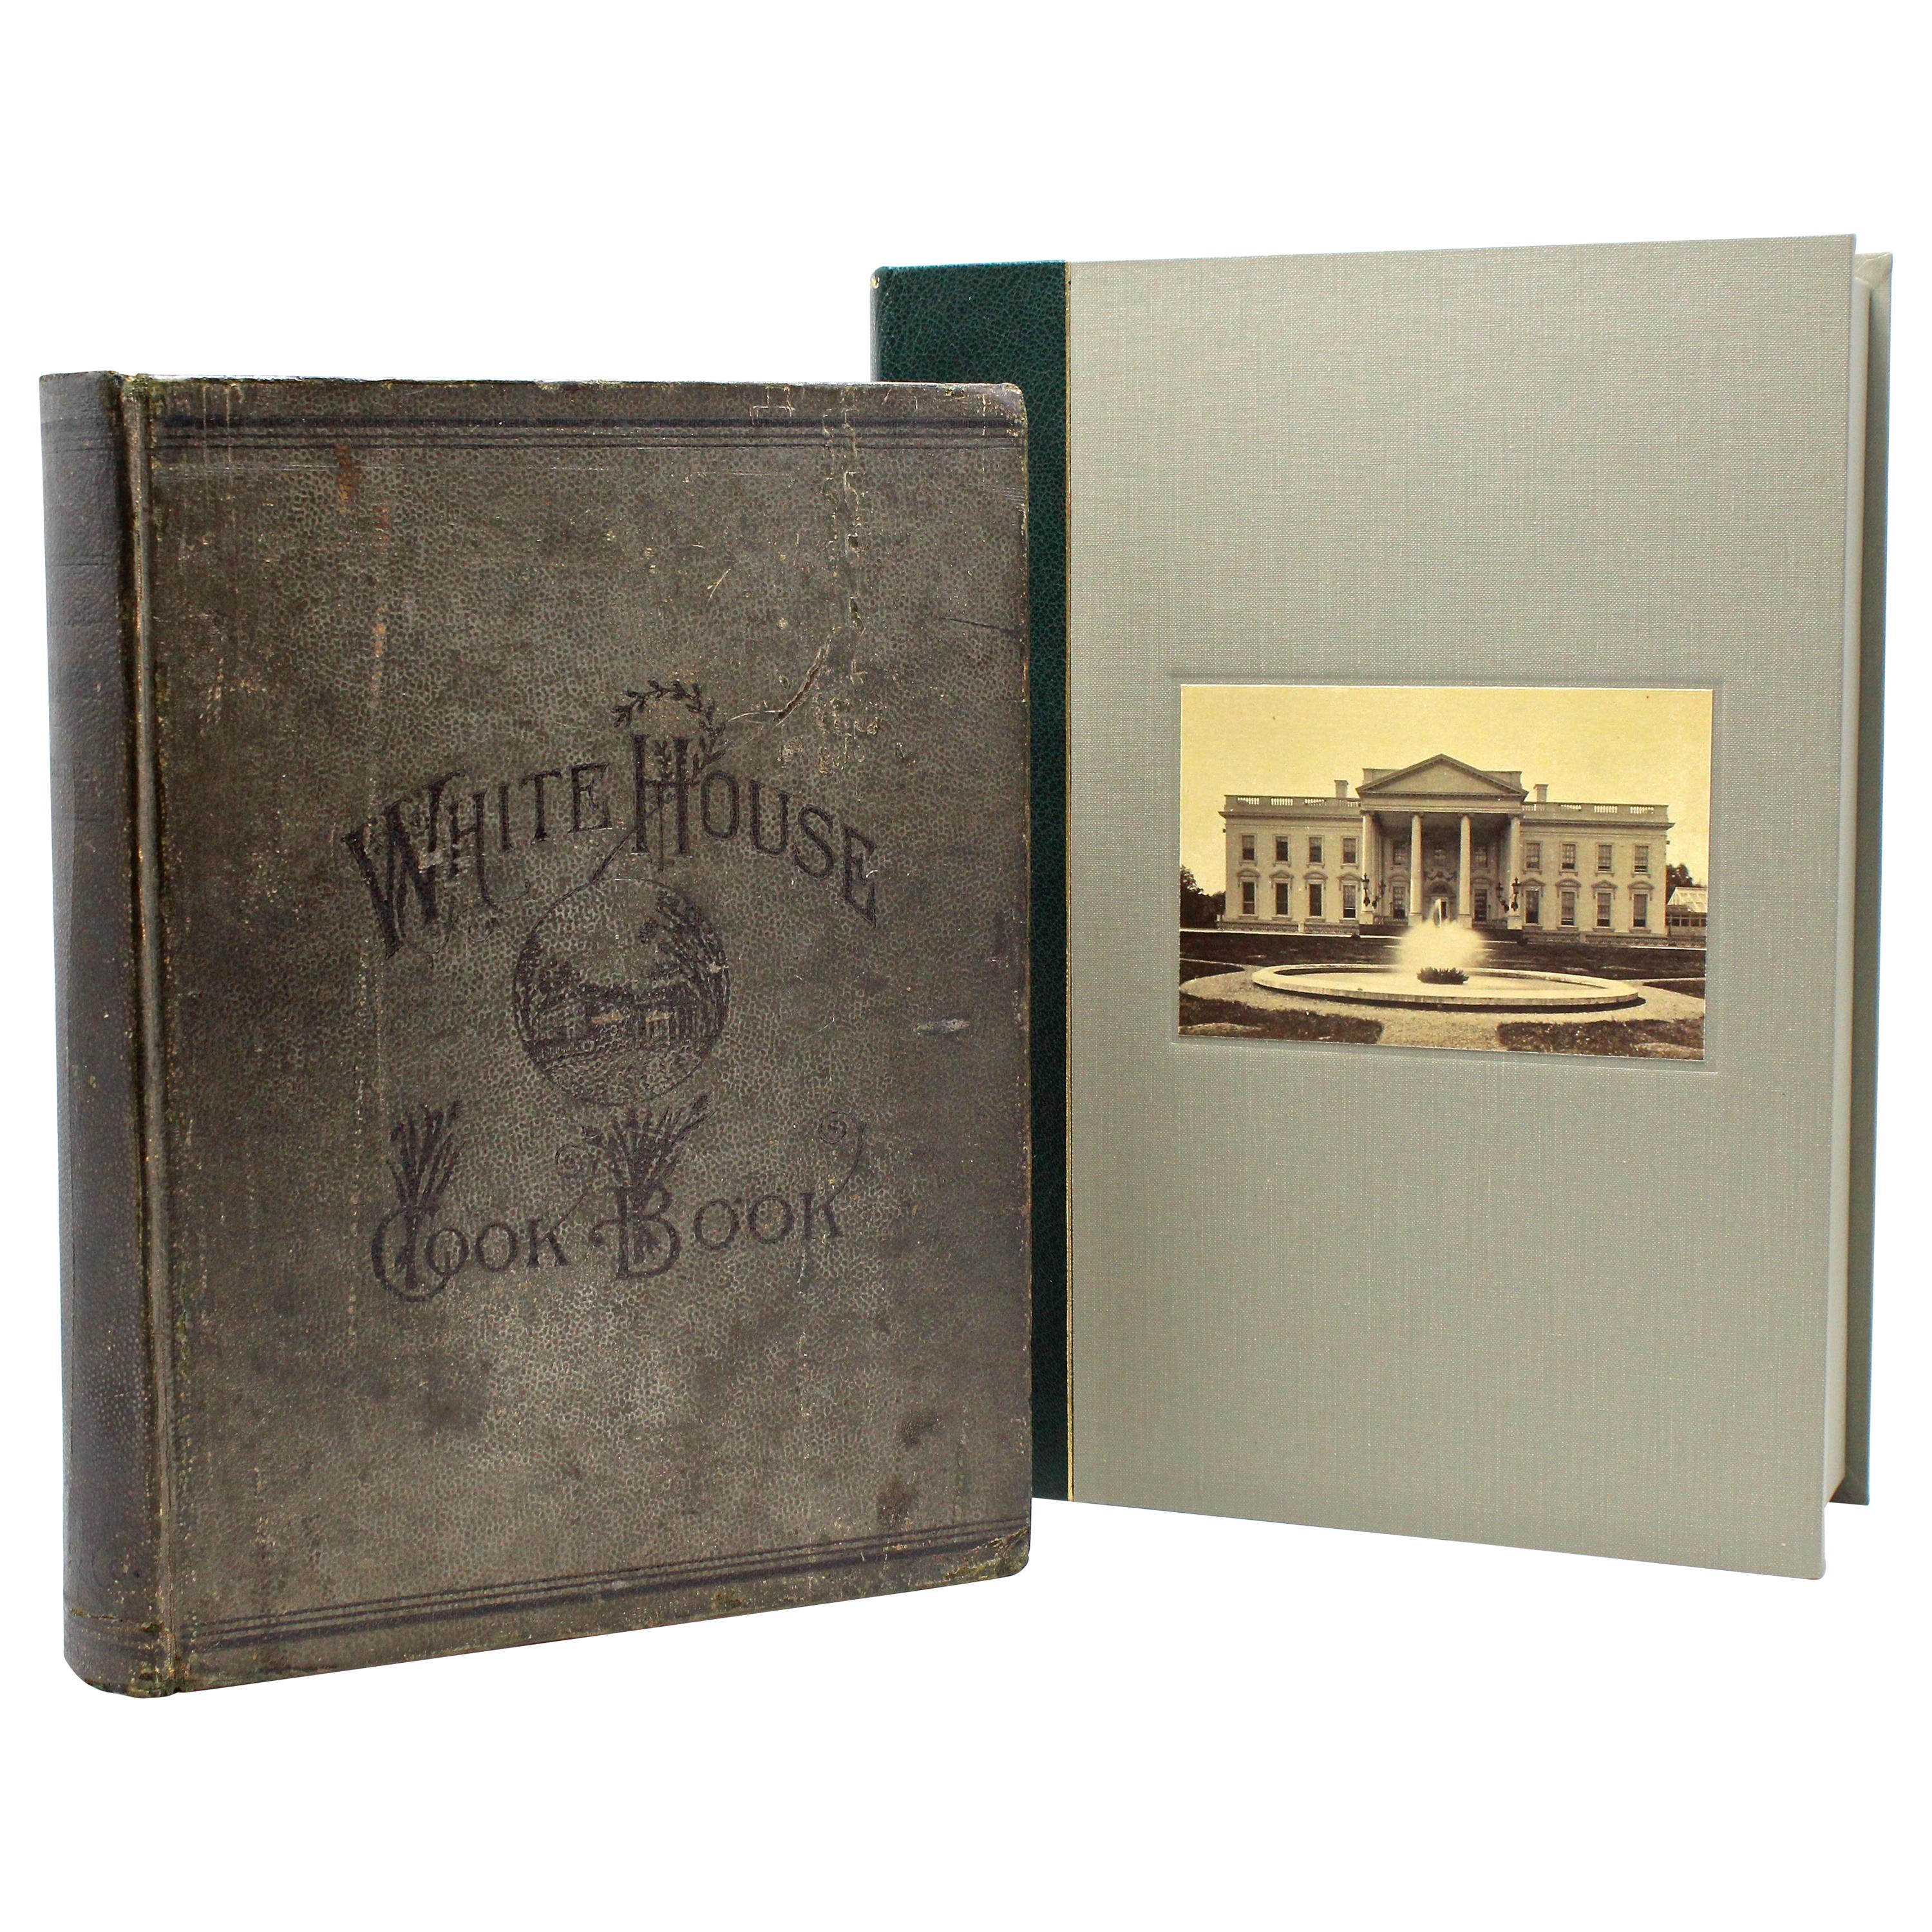 White House Cook Book by F. L. Gillette, First Edition, 1887